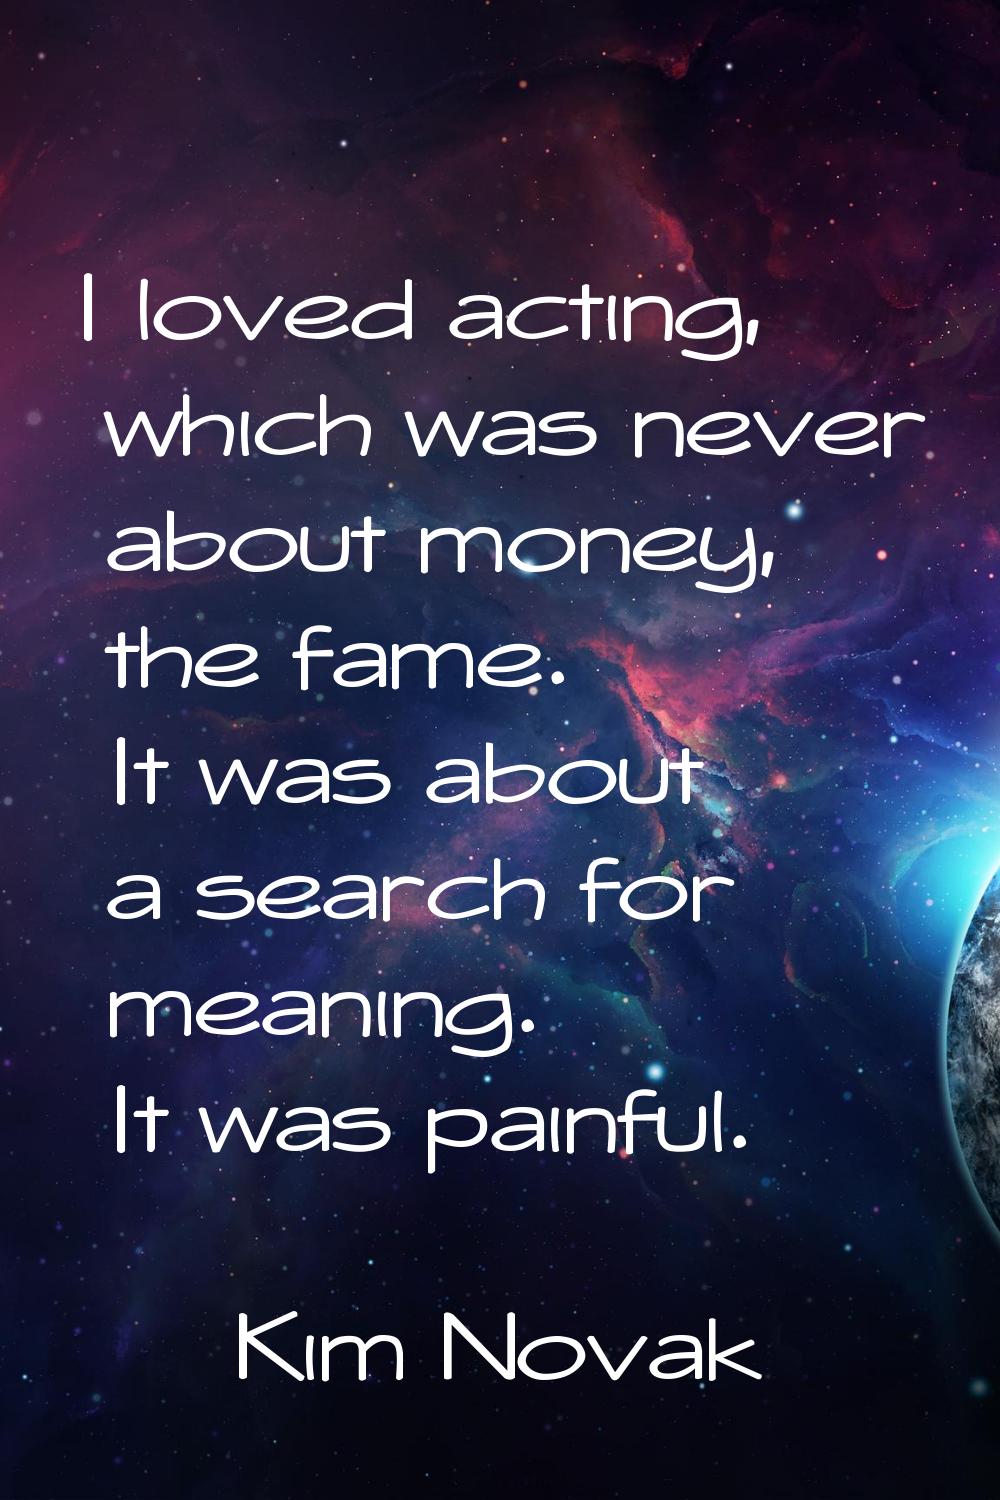 I loved acting, which was never about money, the fame. It was about a search for meaning. It was pa